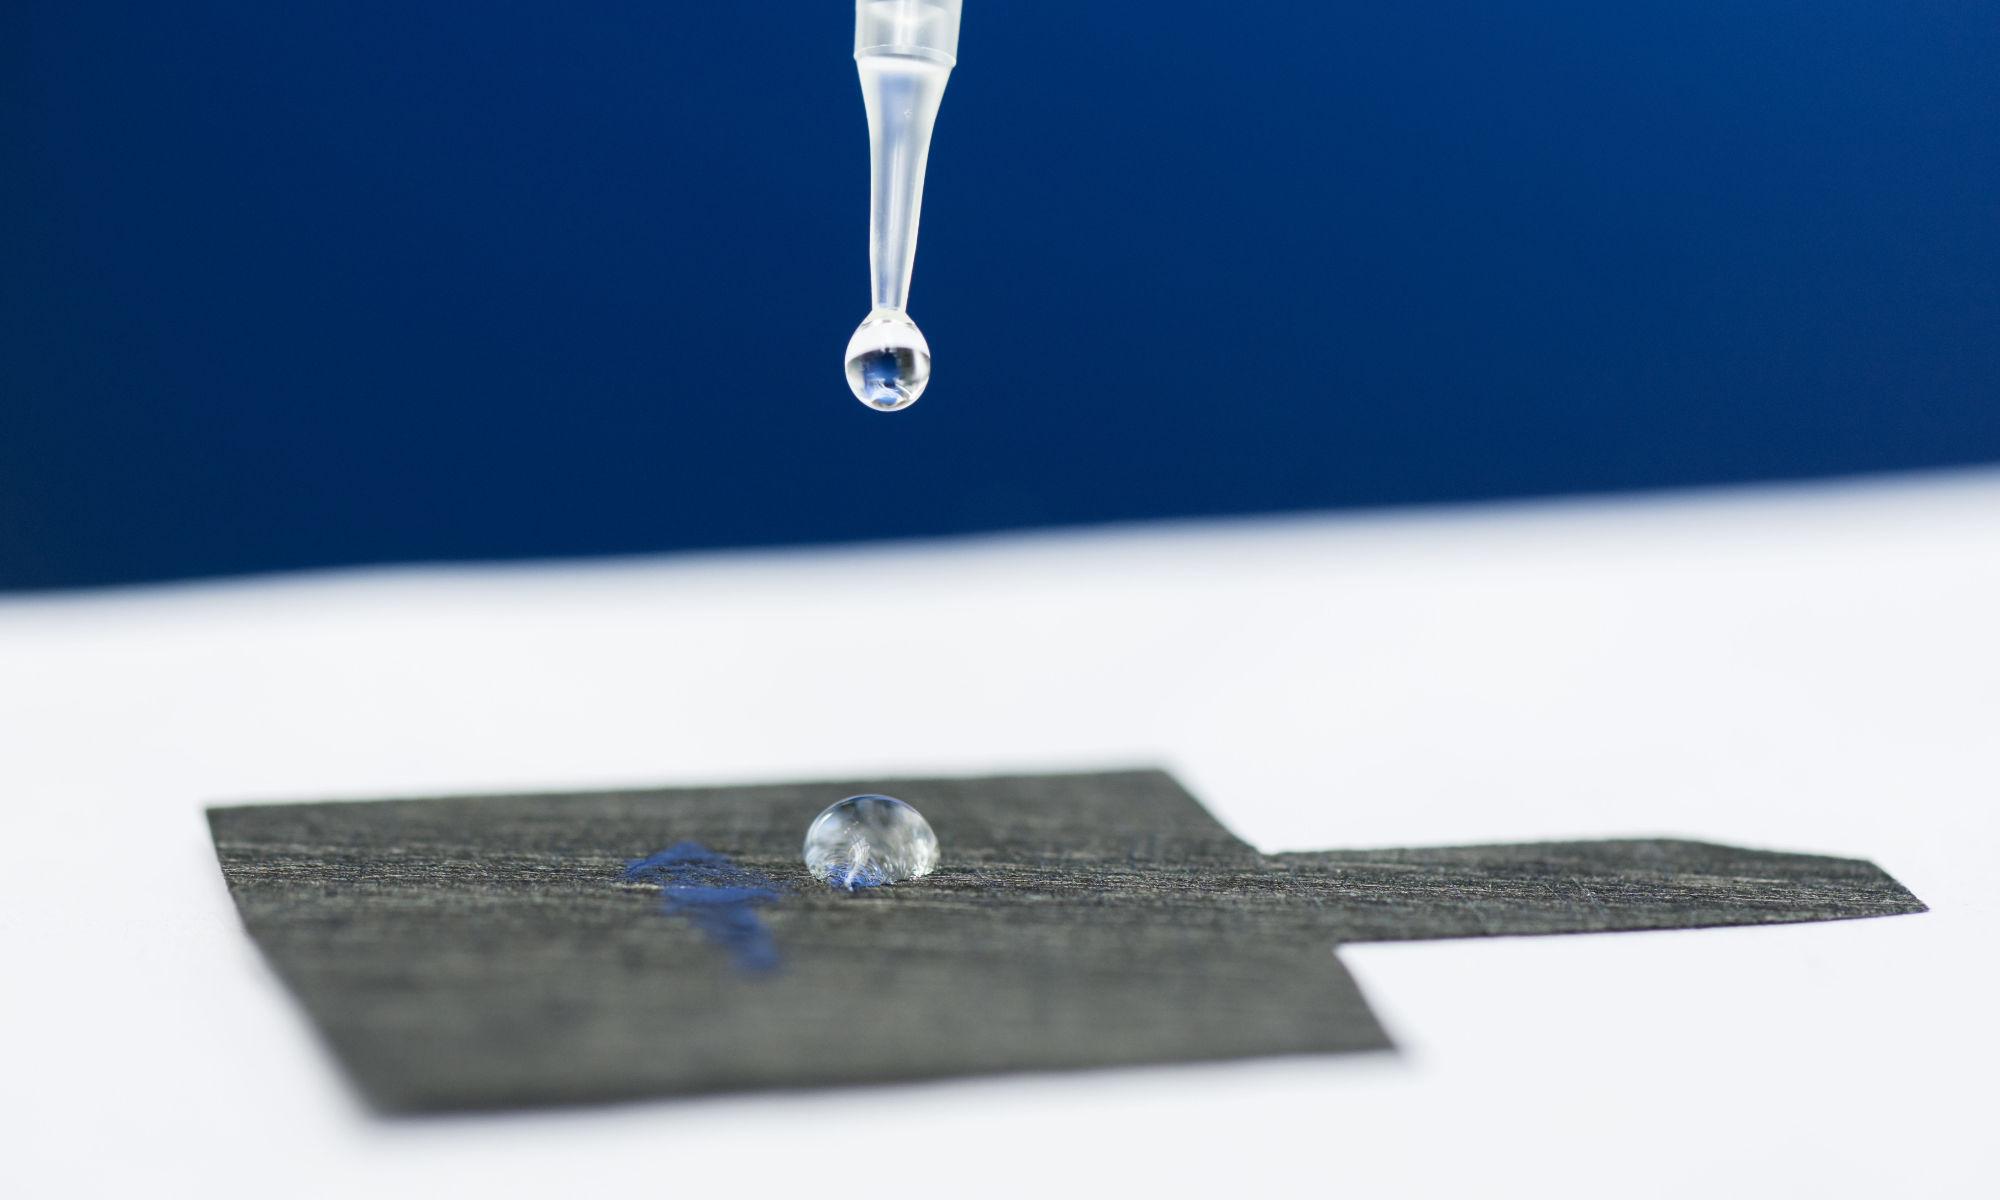 Pipette releasing a water droplet atop carbon paper to illustrate pfas chemical remediation.